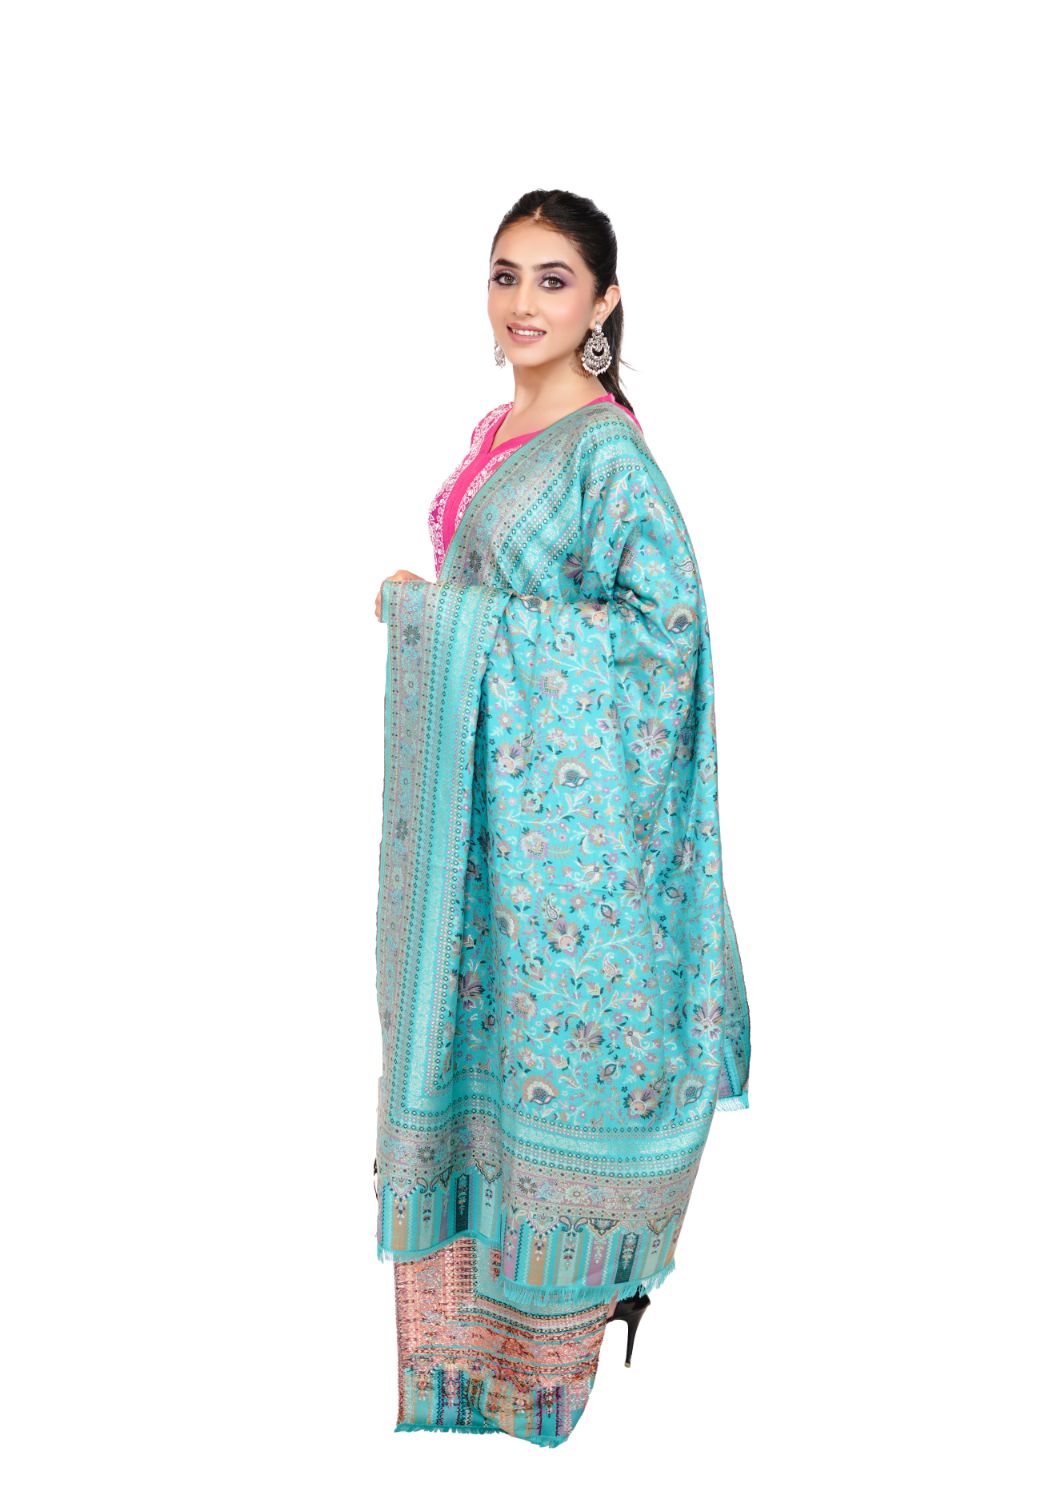 Soft Bamboo Modal Shawl with Zari for Women - Icy Blue